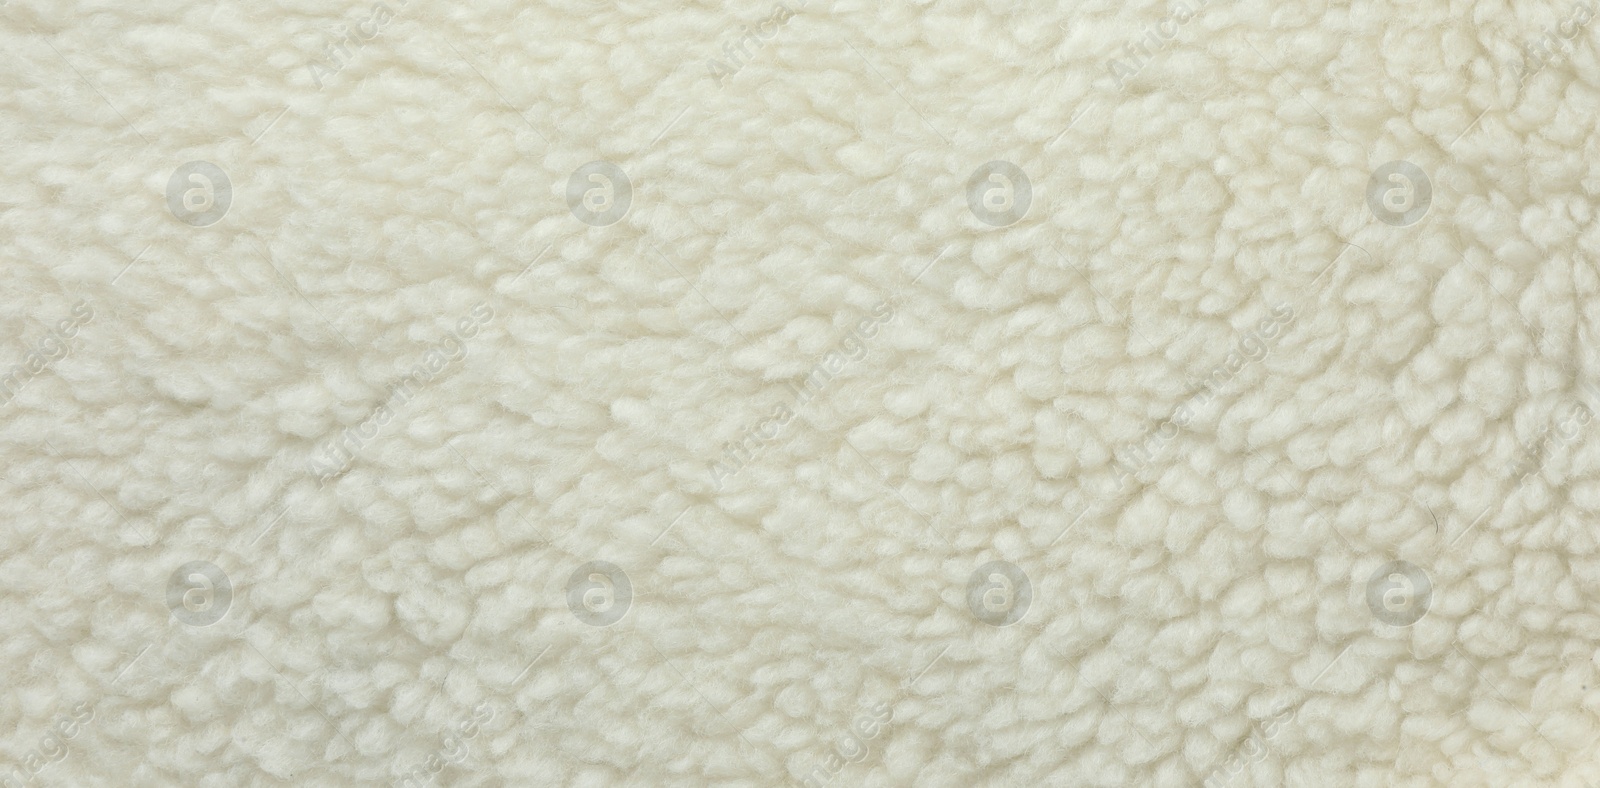 Photo of Texture of white fleece fabric as background, top view